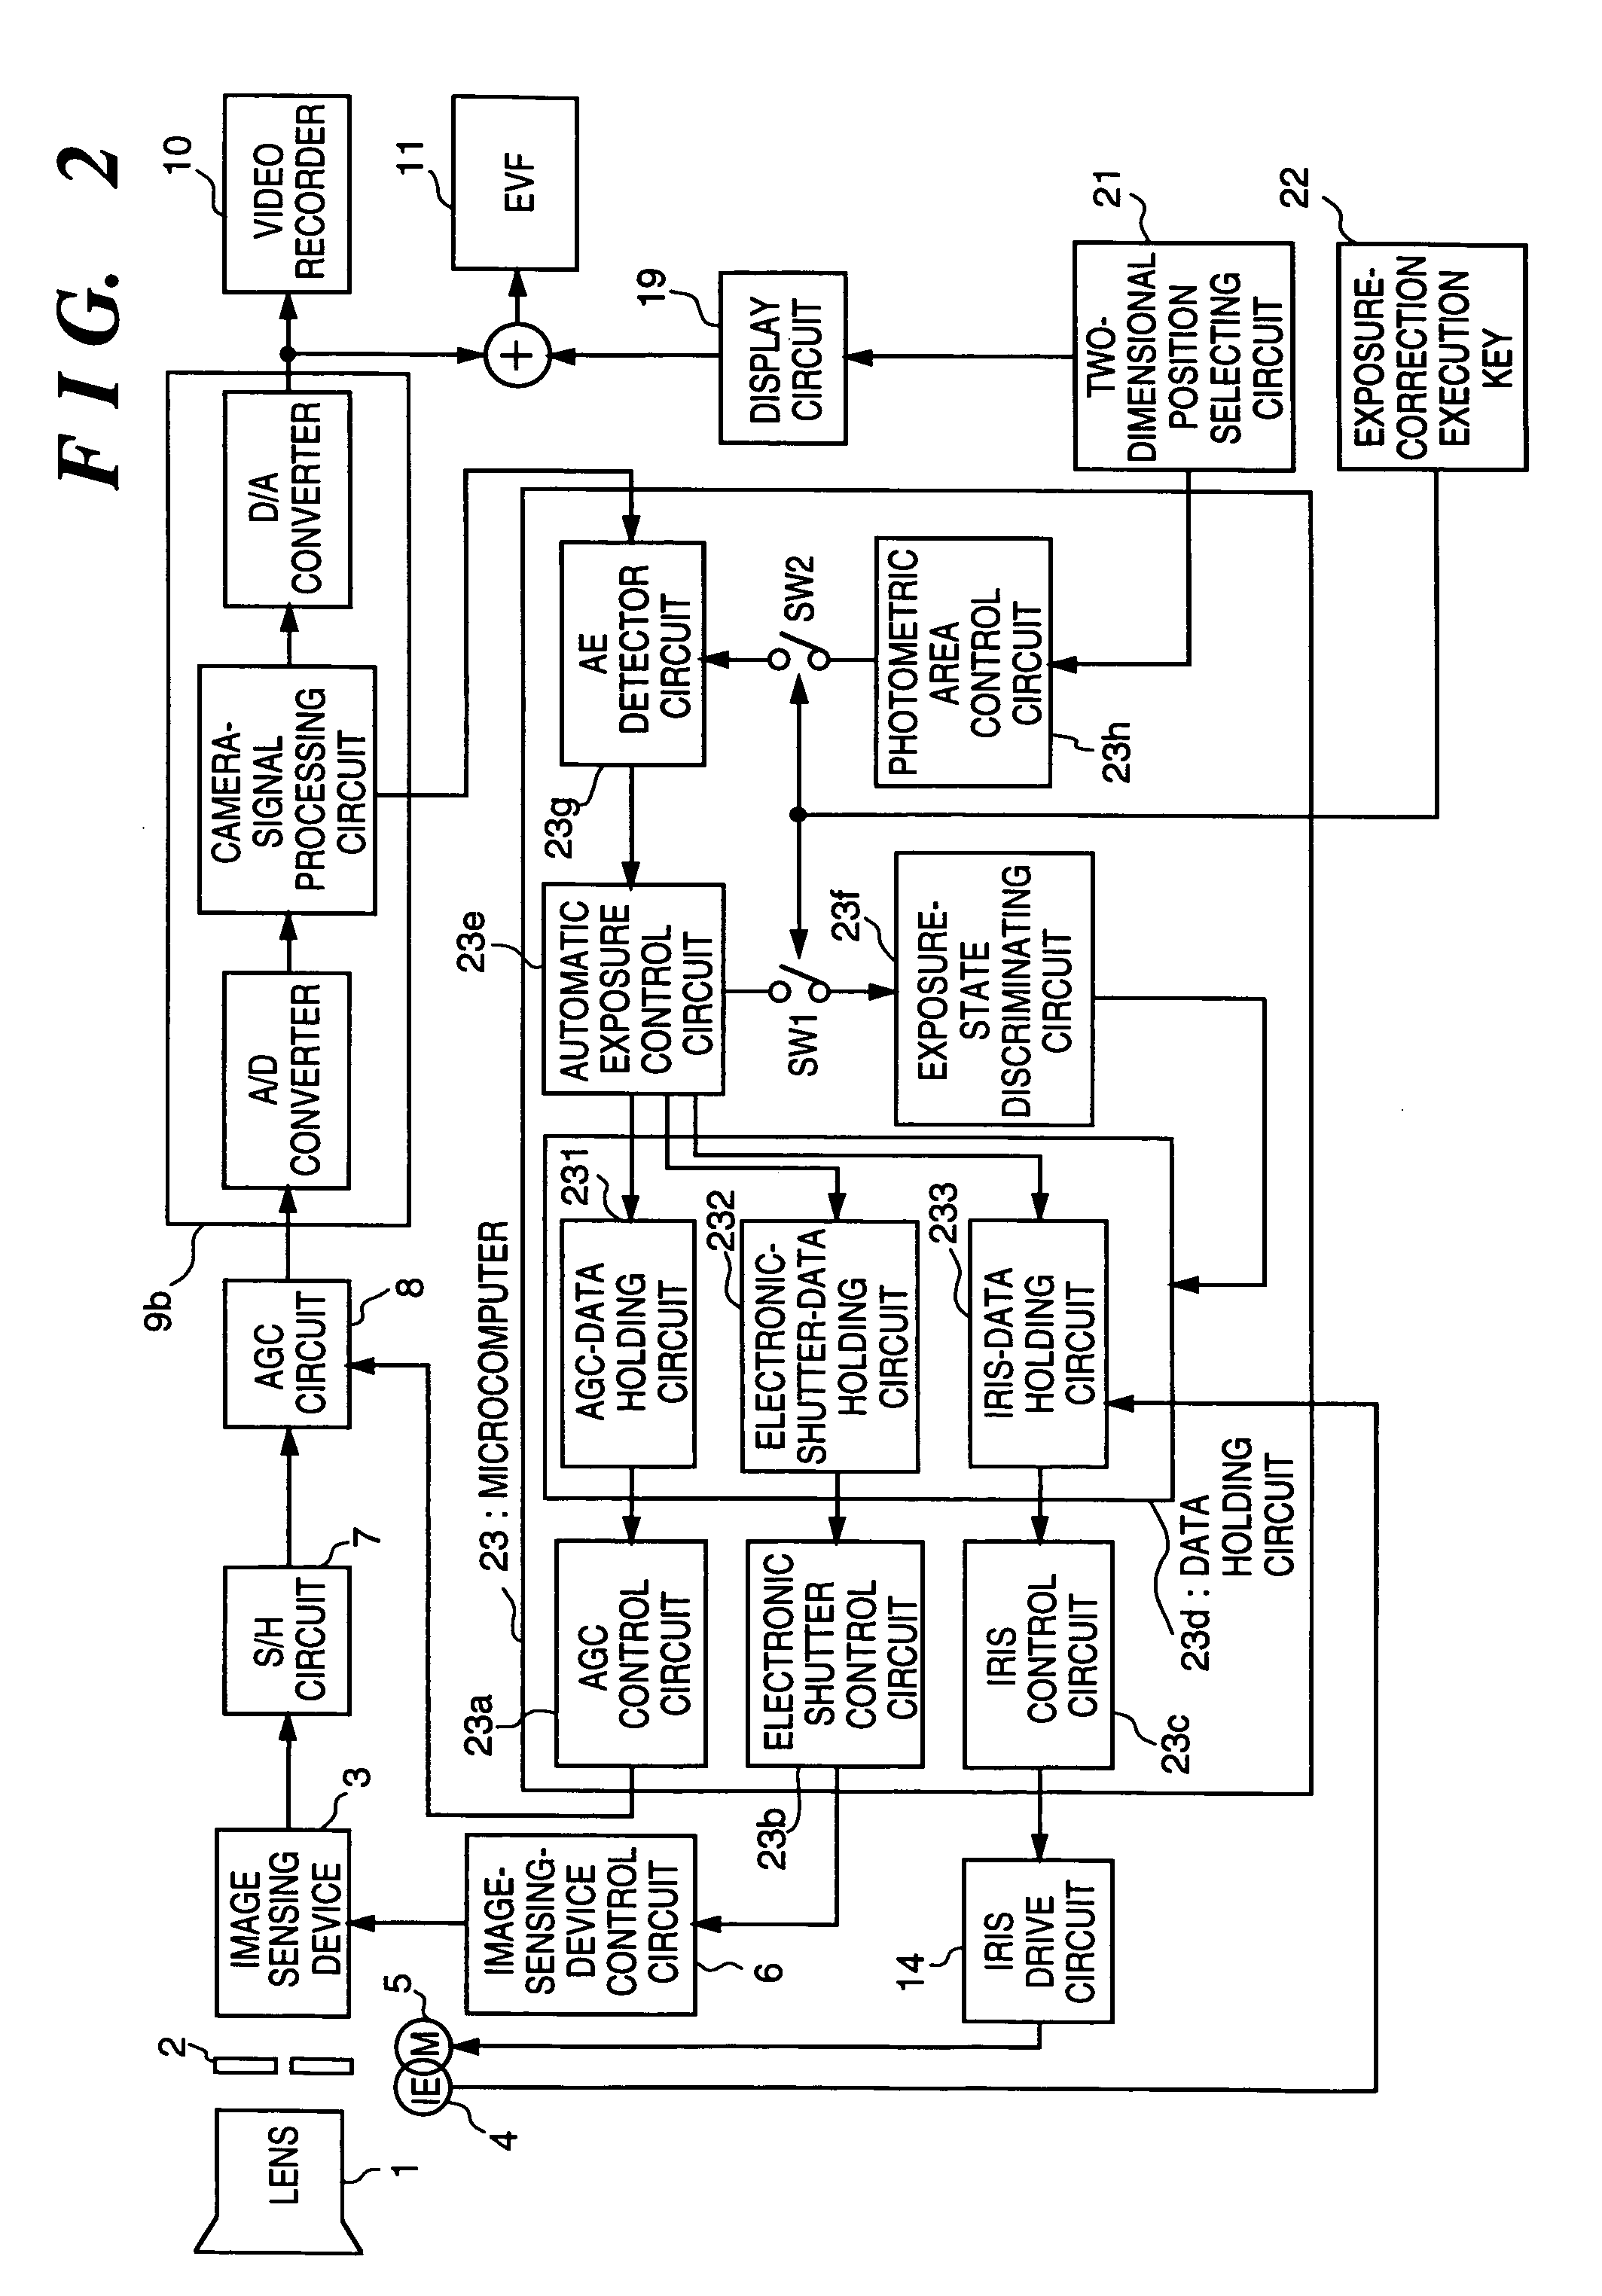 Image sensing apparatus which carries out optimum exposure control of subject